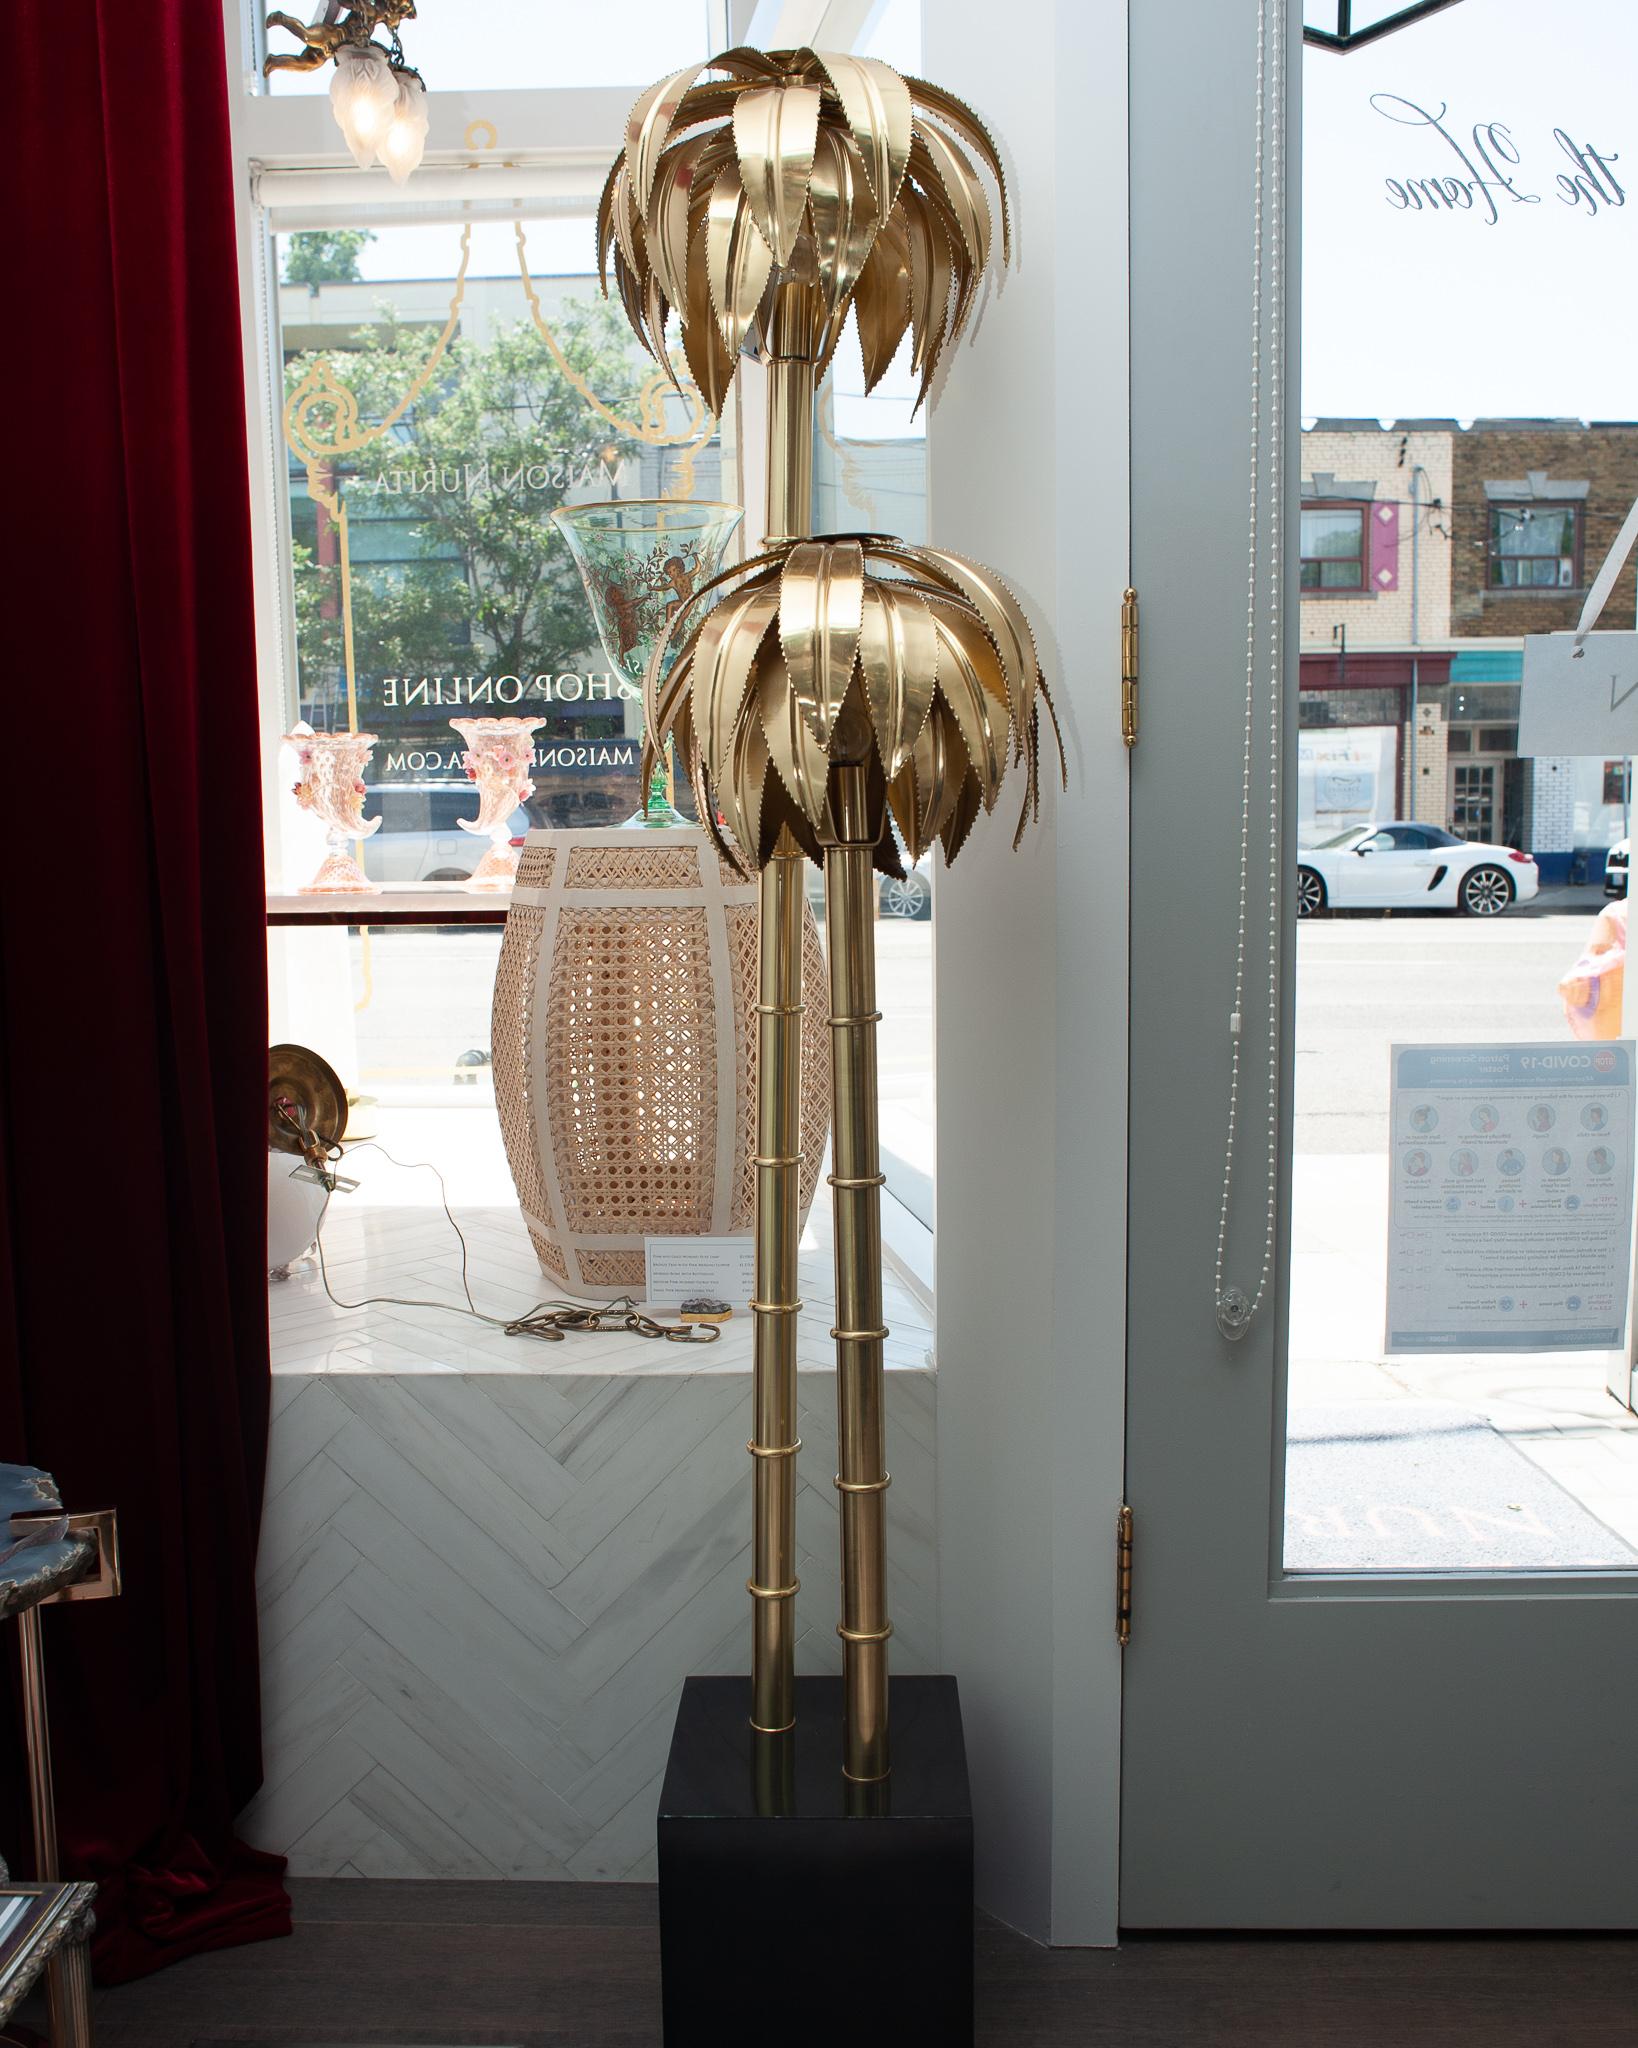 Unable to visit Miami, this pair of beautifully made metal midcentury inspired palm lamps will bring Miami to you. One of our favourite cities, Miami is known for its rich Art Deco history. Constructed entirely by hand in brass, these lamps will add